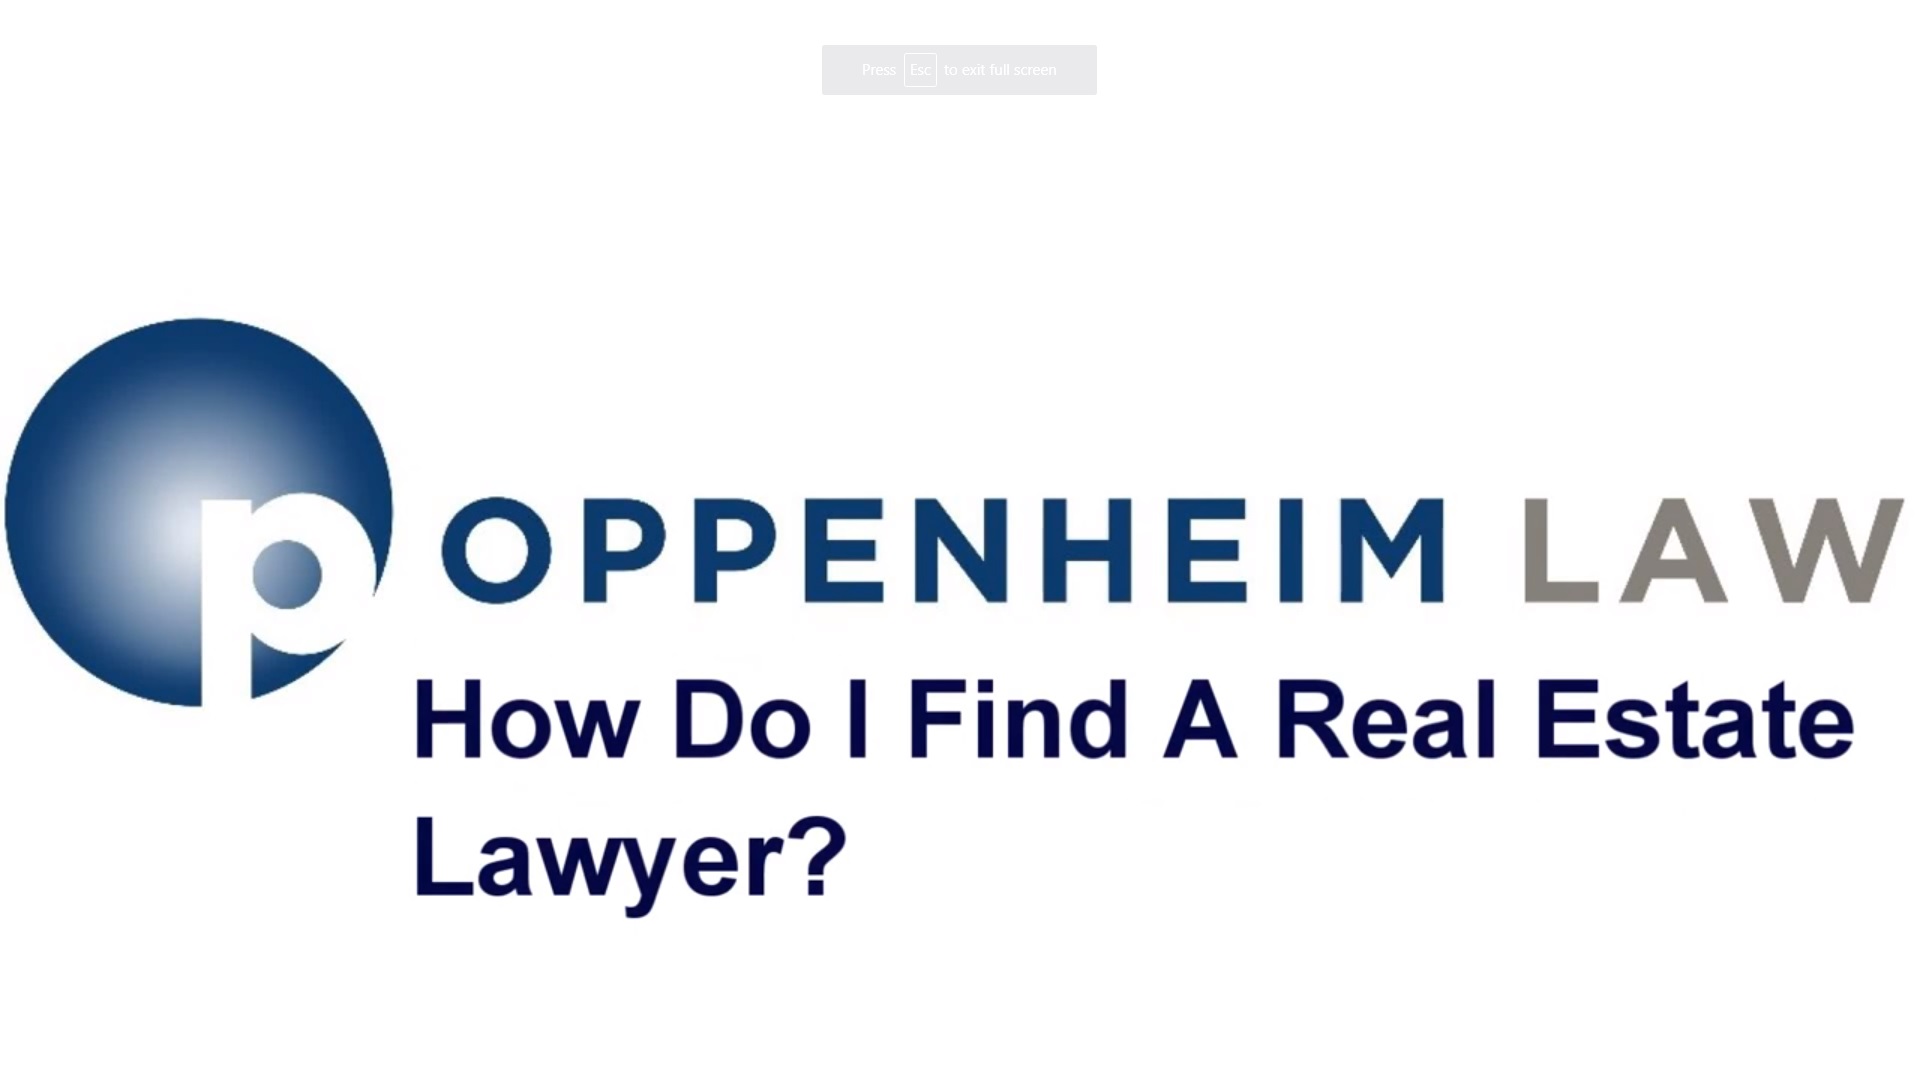 How Do I Find A Real Estate Lawyer?